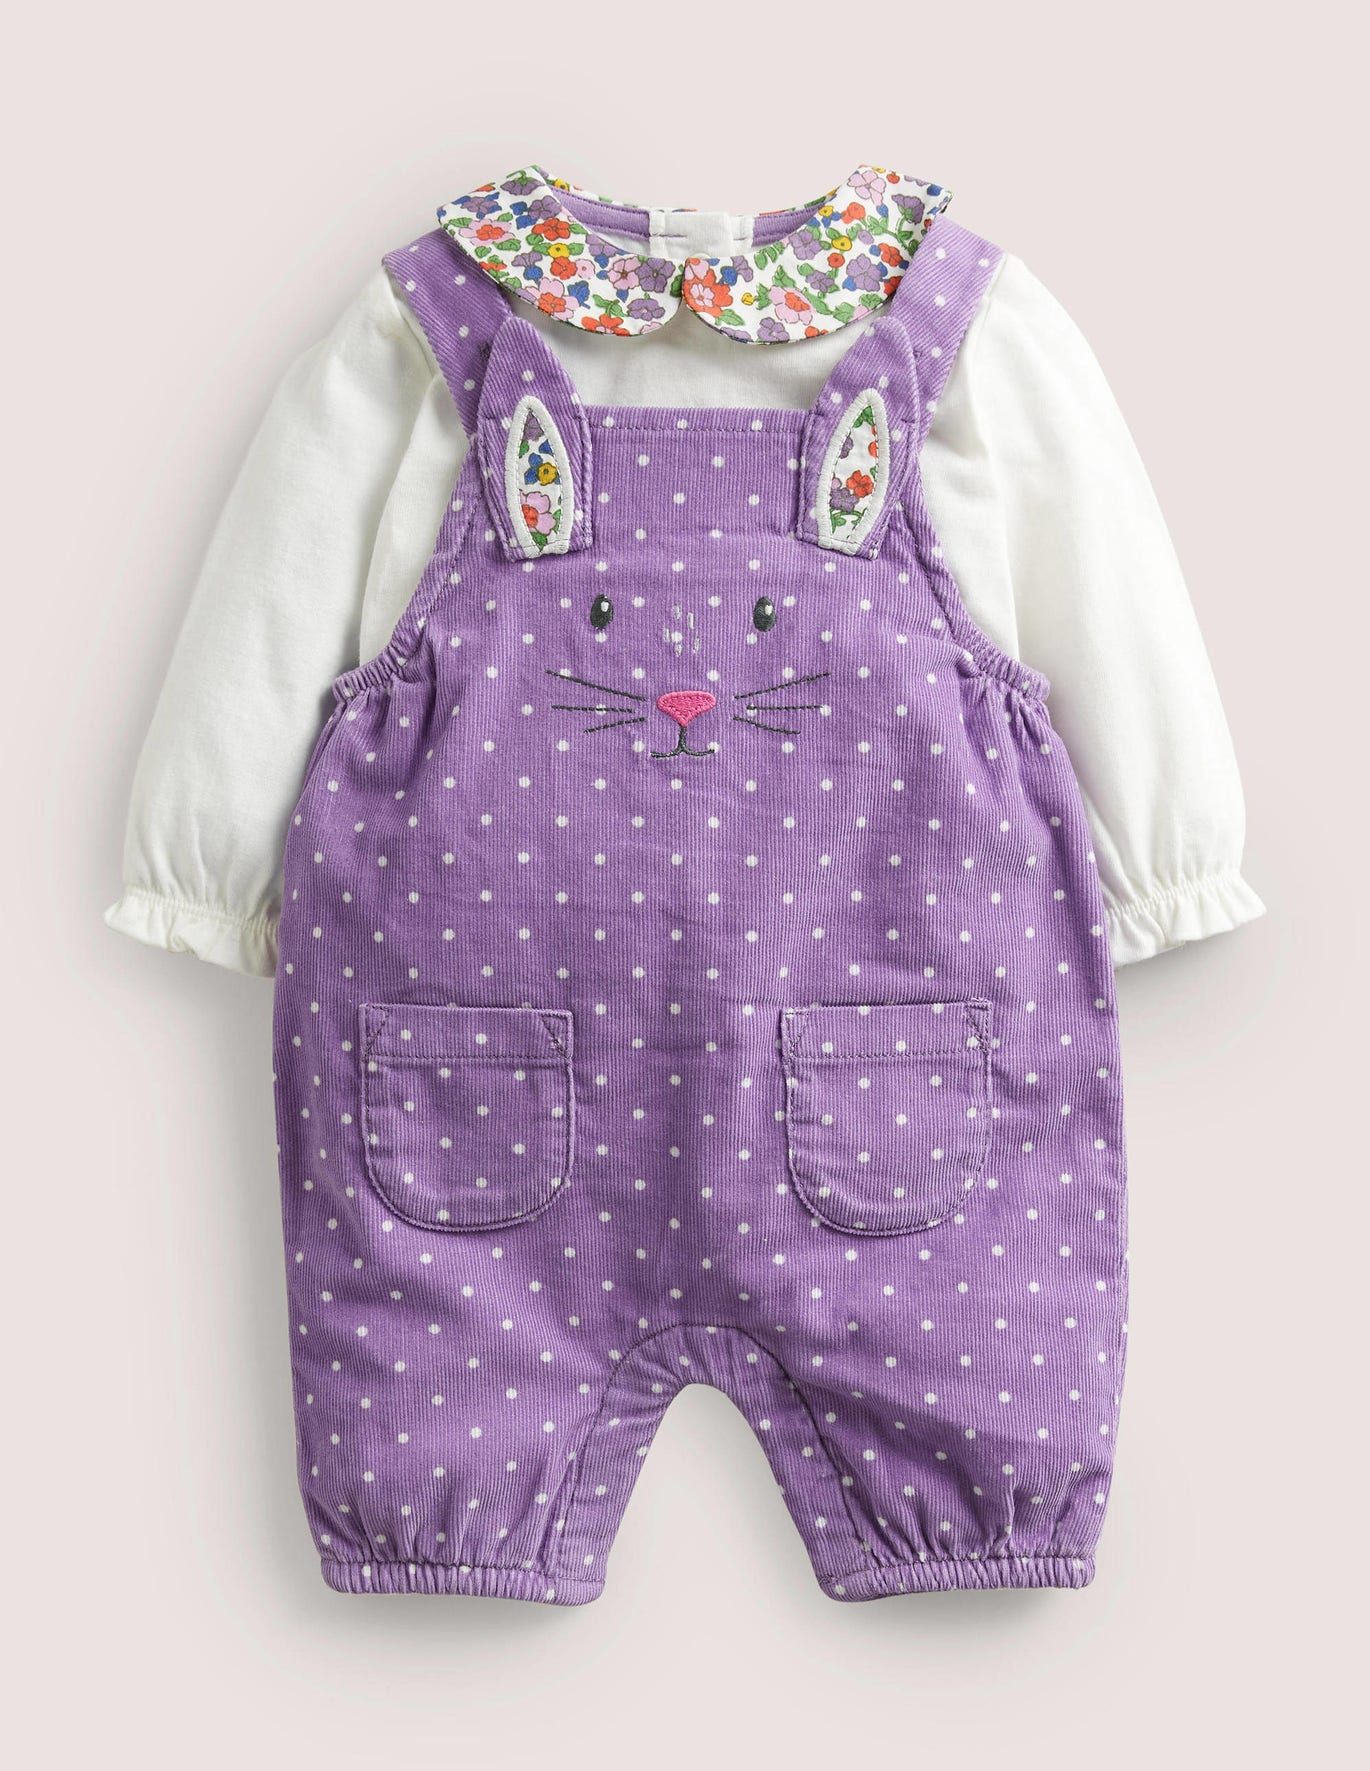 Boden Cord Dungaree Set - Aster Purple Pin Spot Bunny